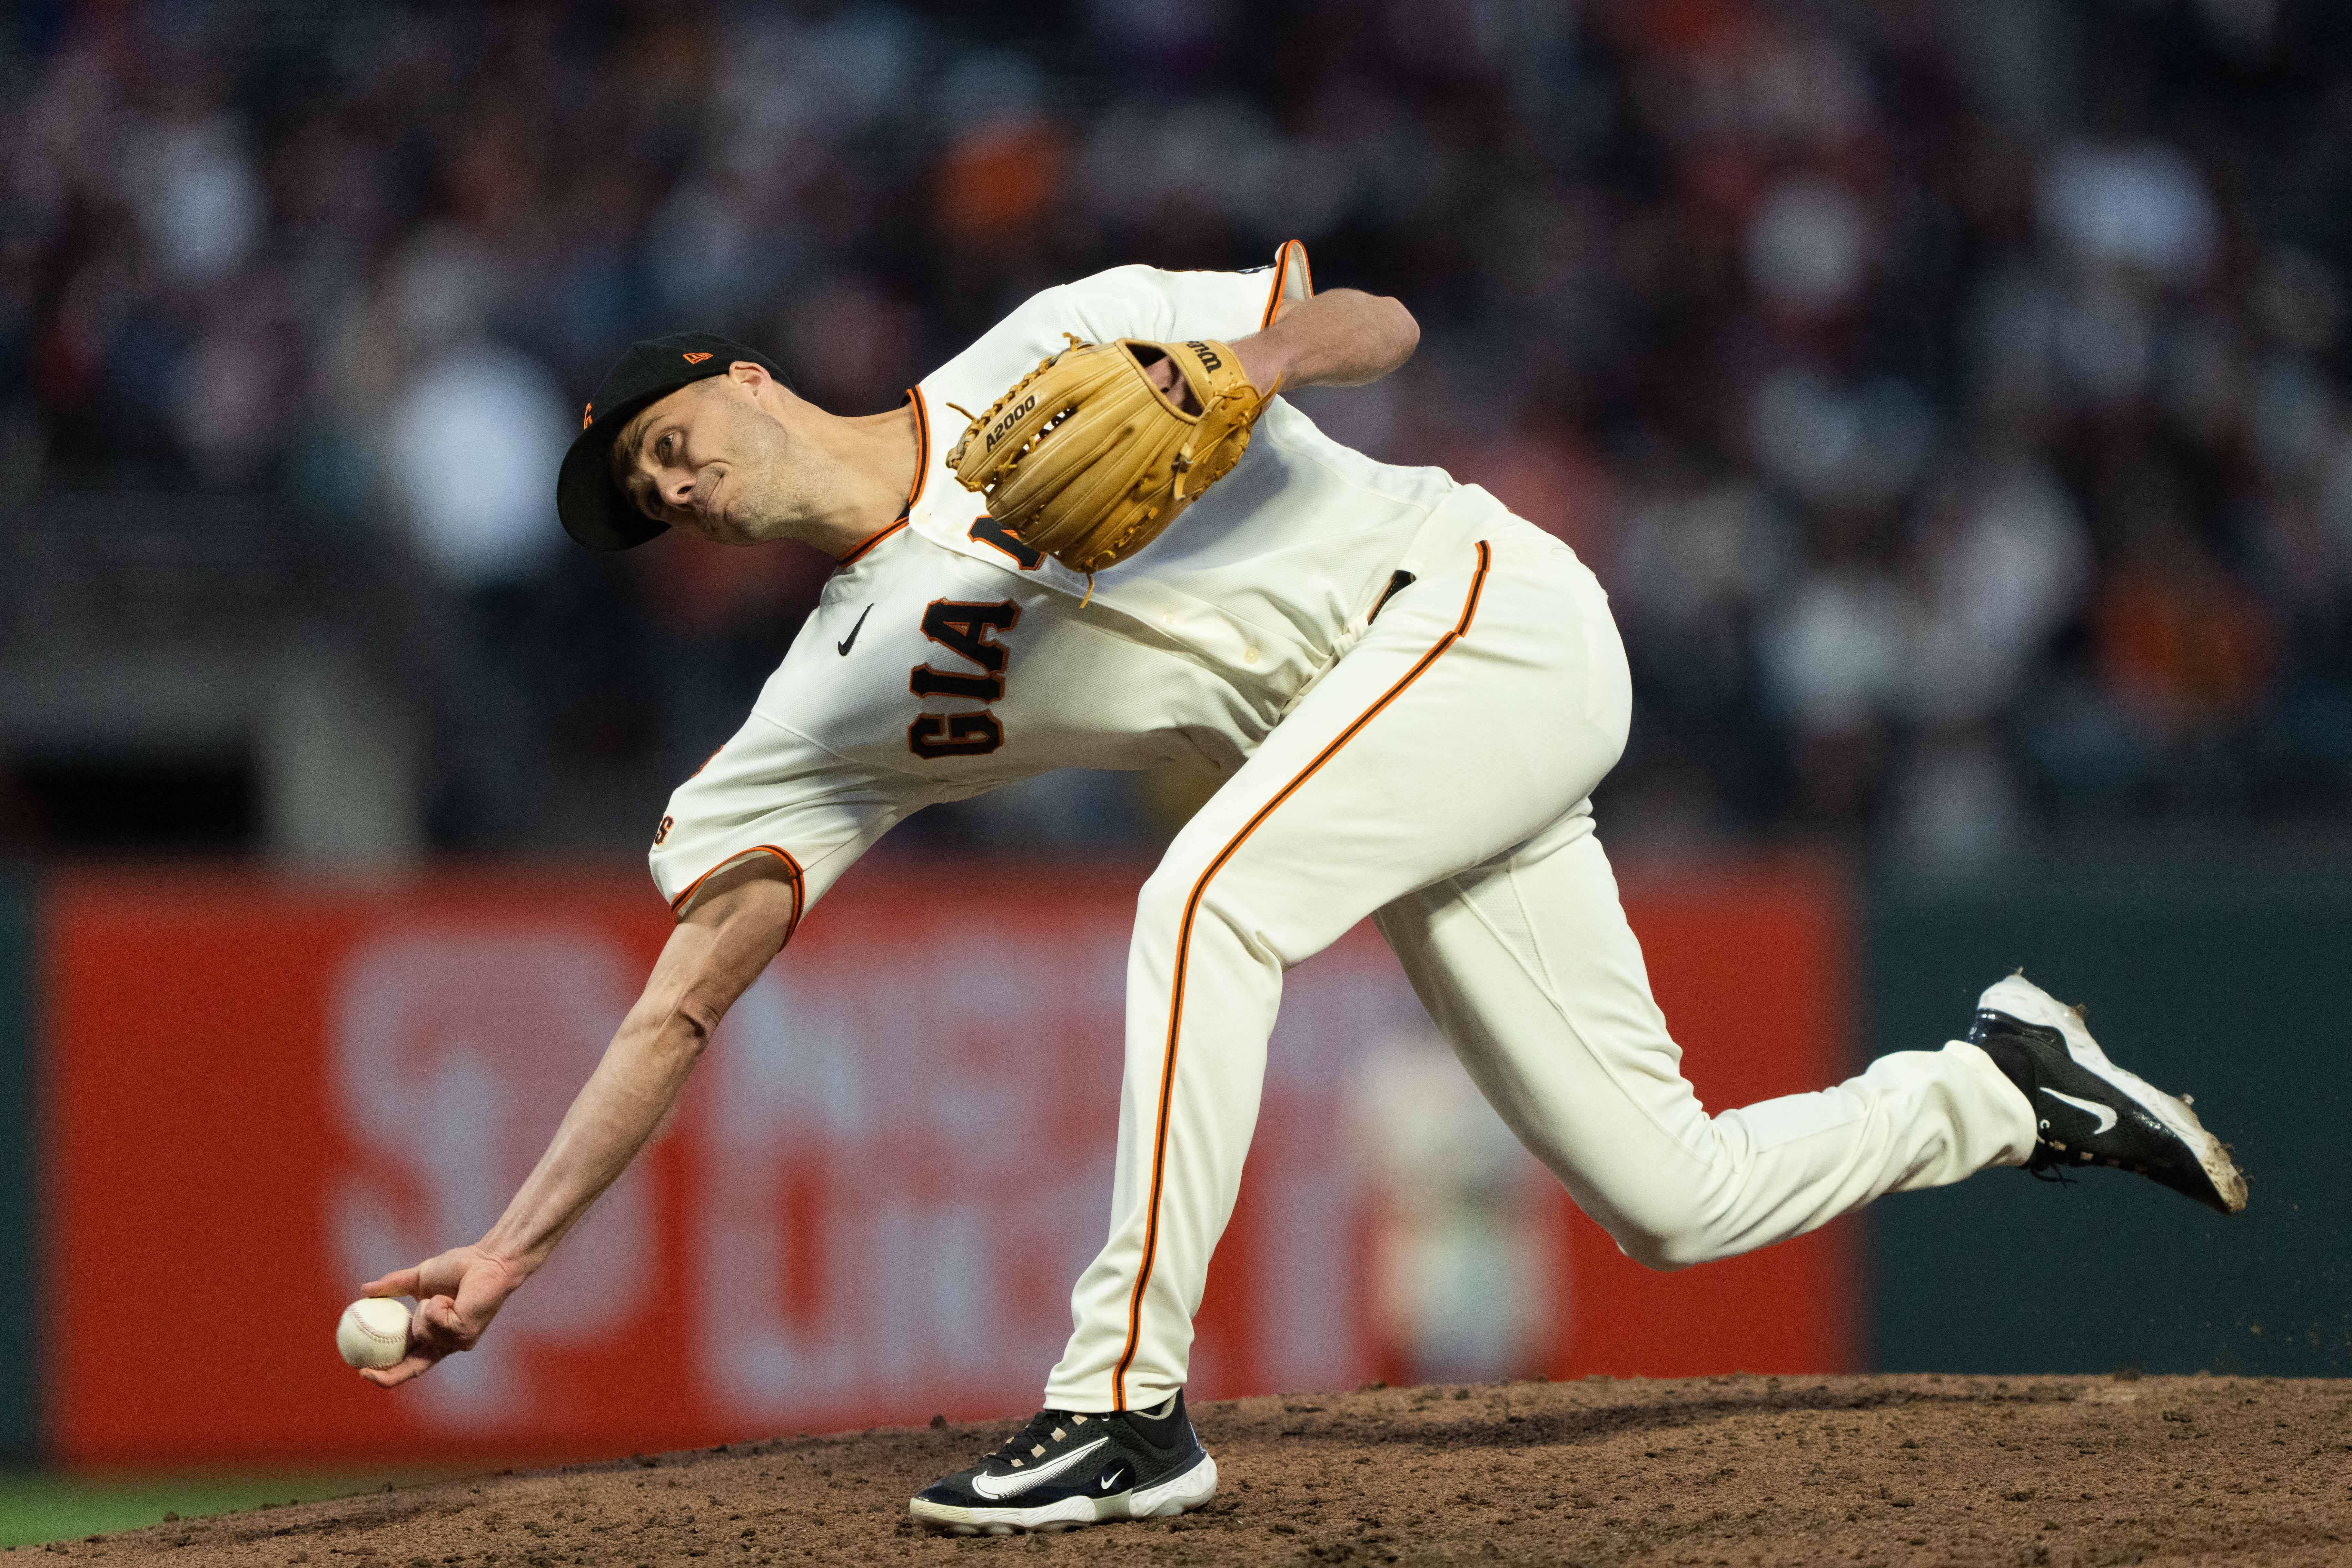 Giants complete 3-game sweep of Rockies behind rookie pitcher's